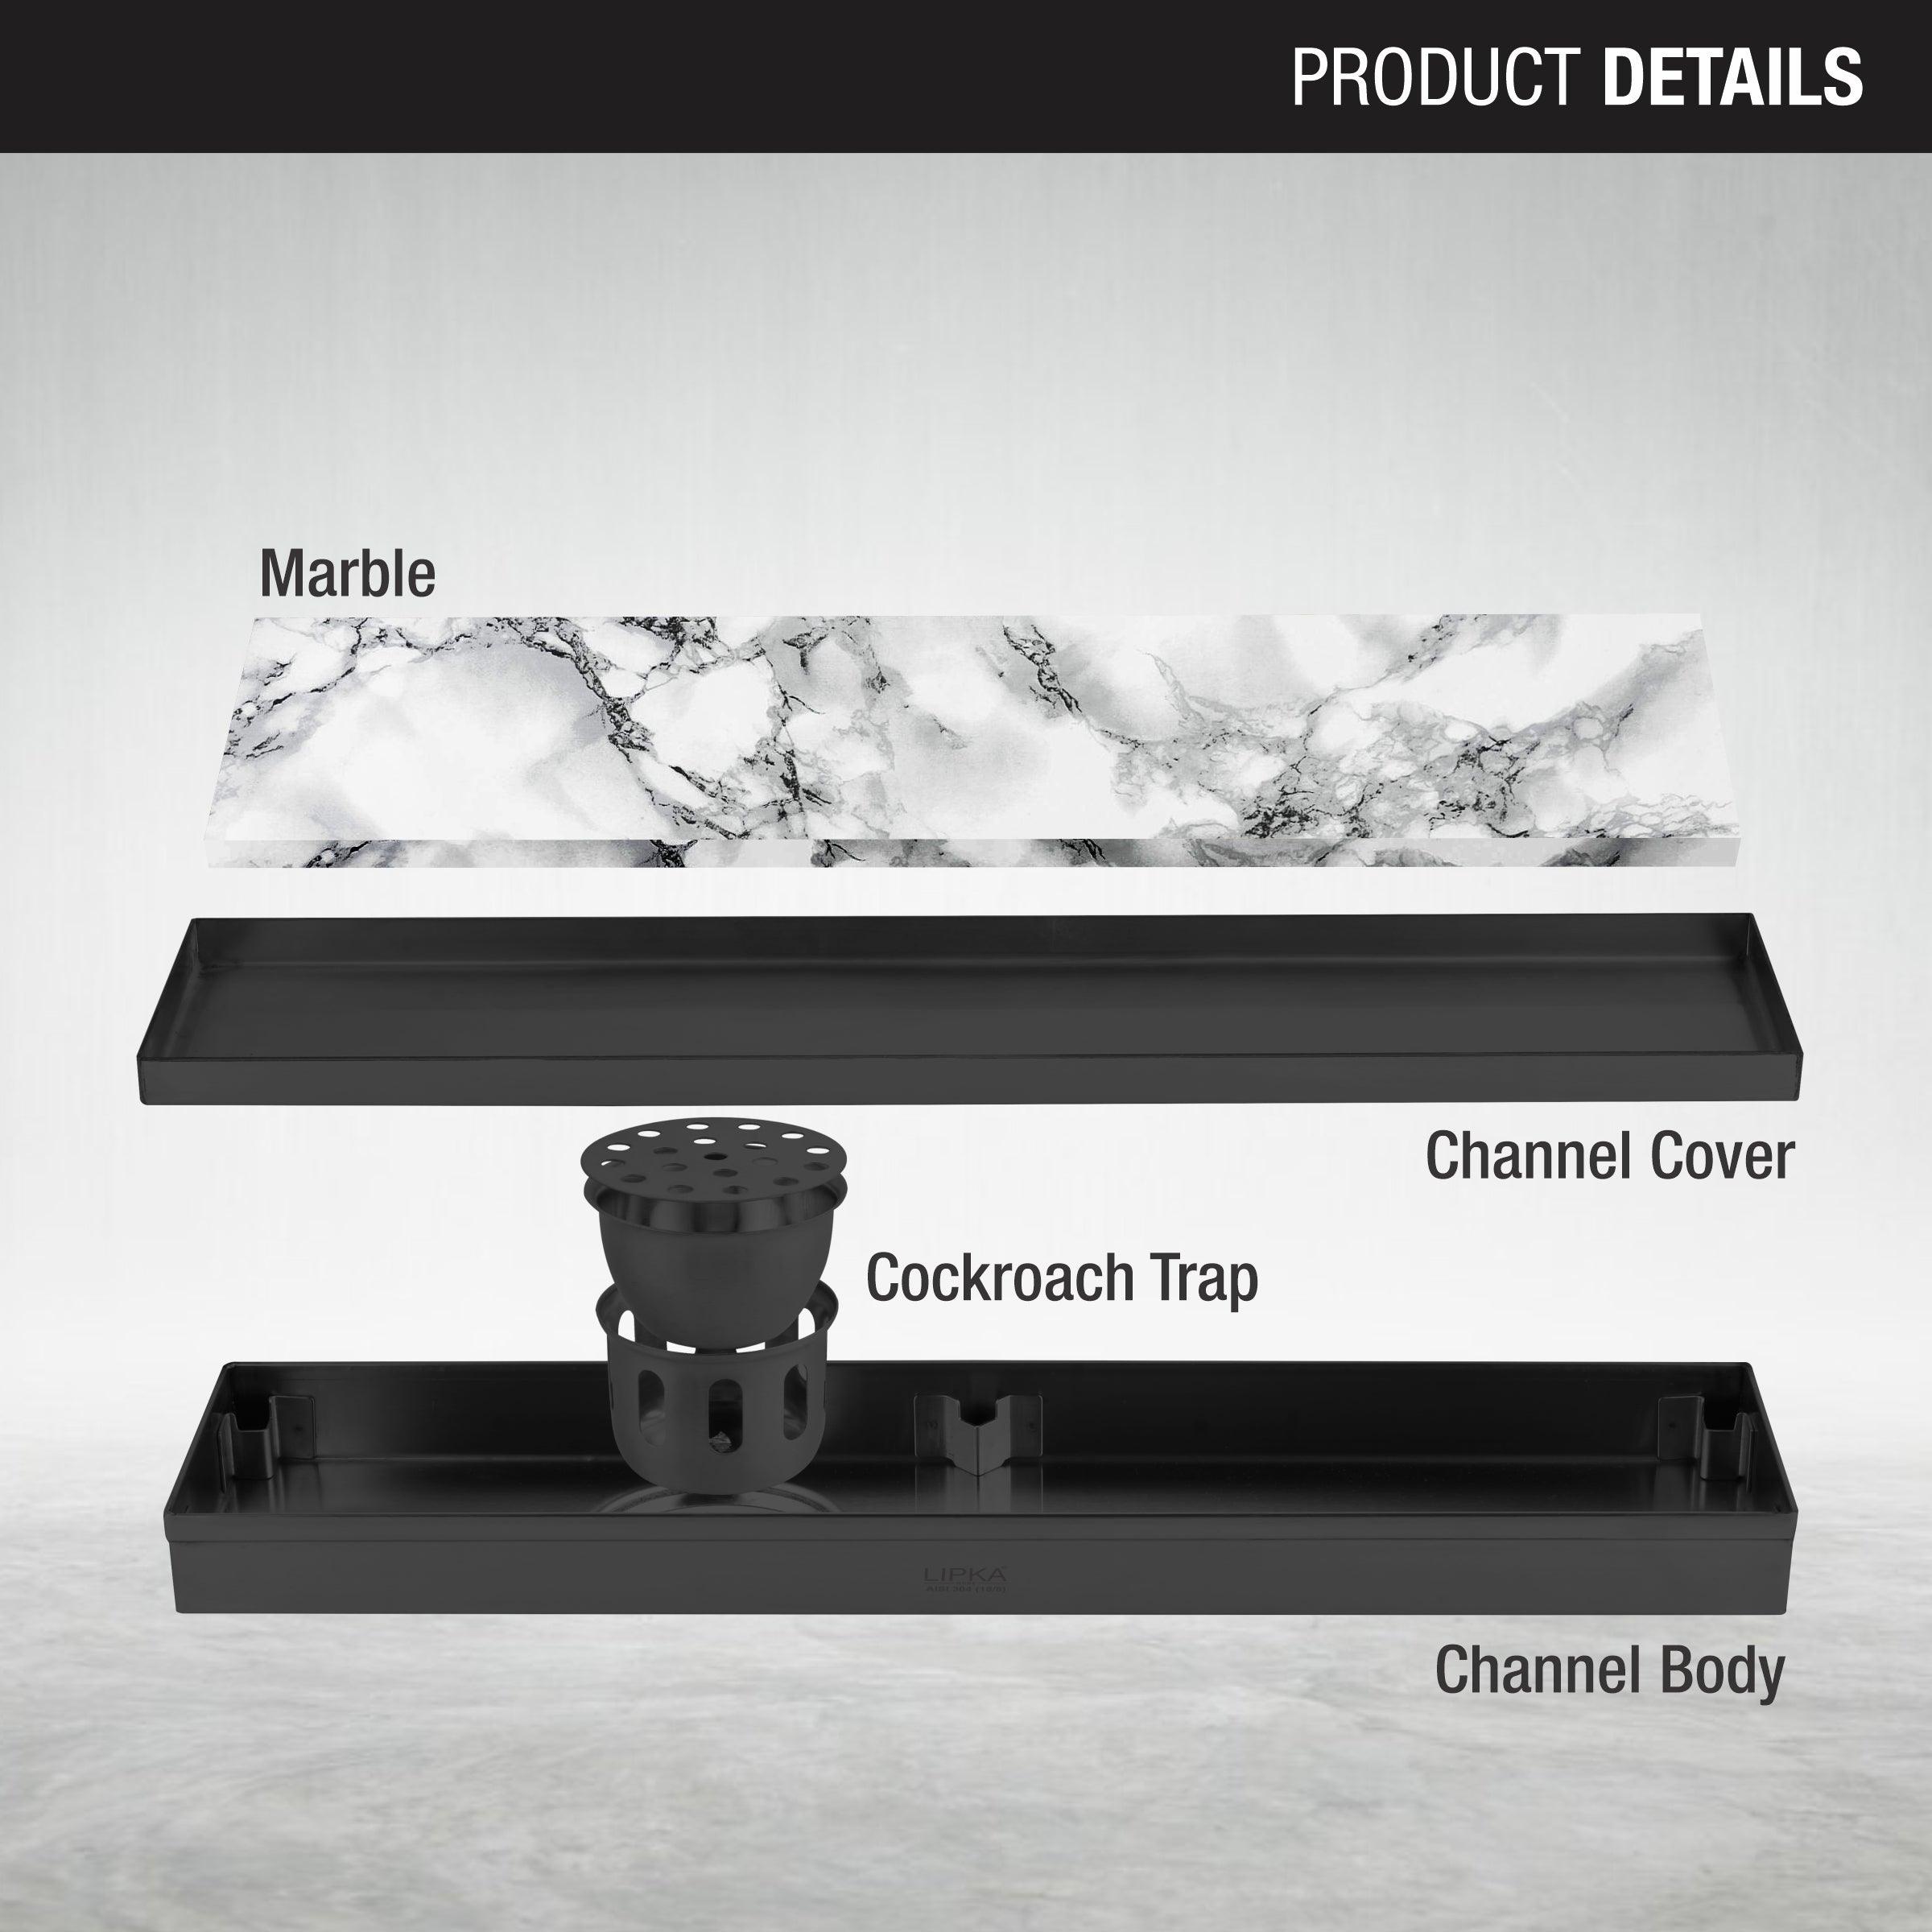 Marble Insert Shower Drain Channel - Black (32 x 5 Inches) parts